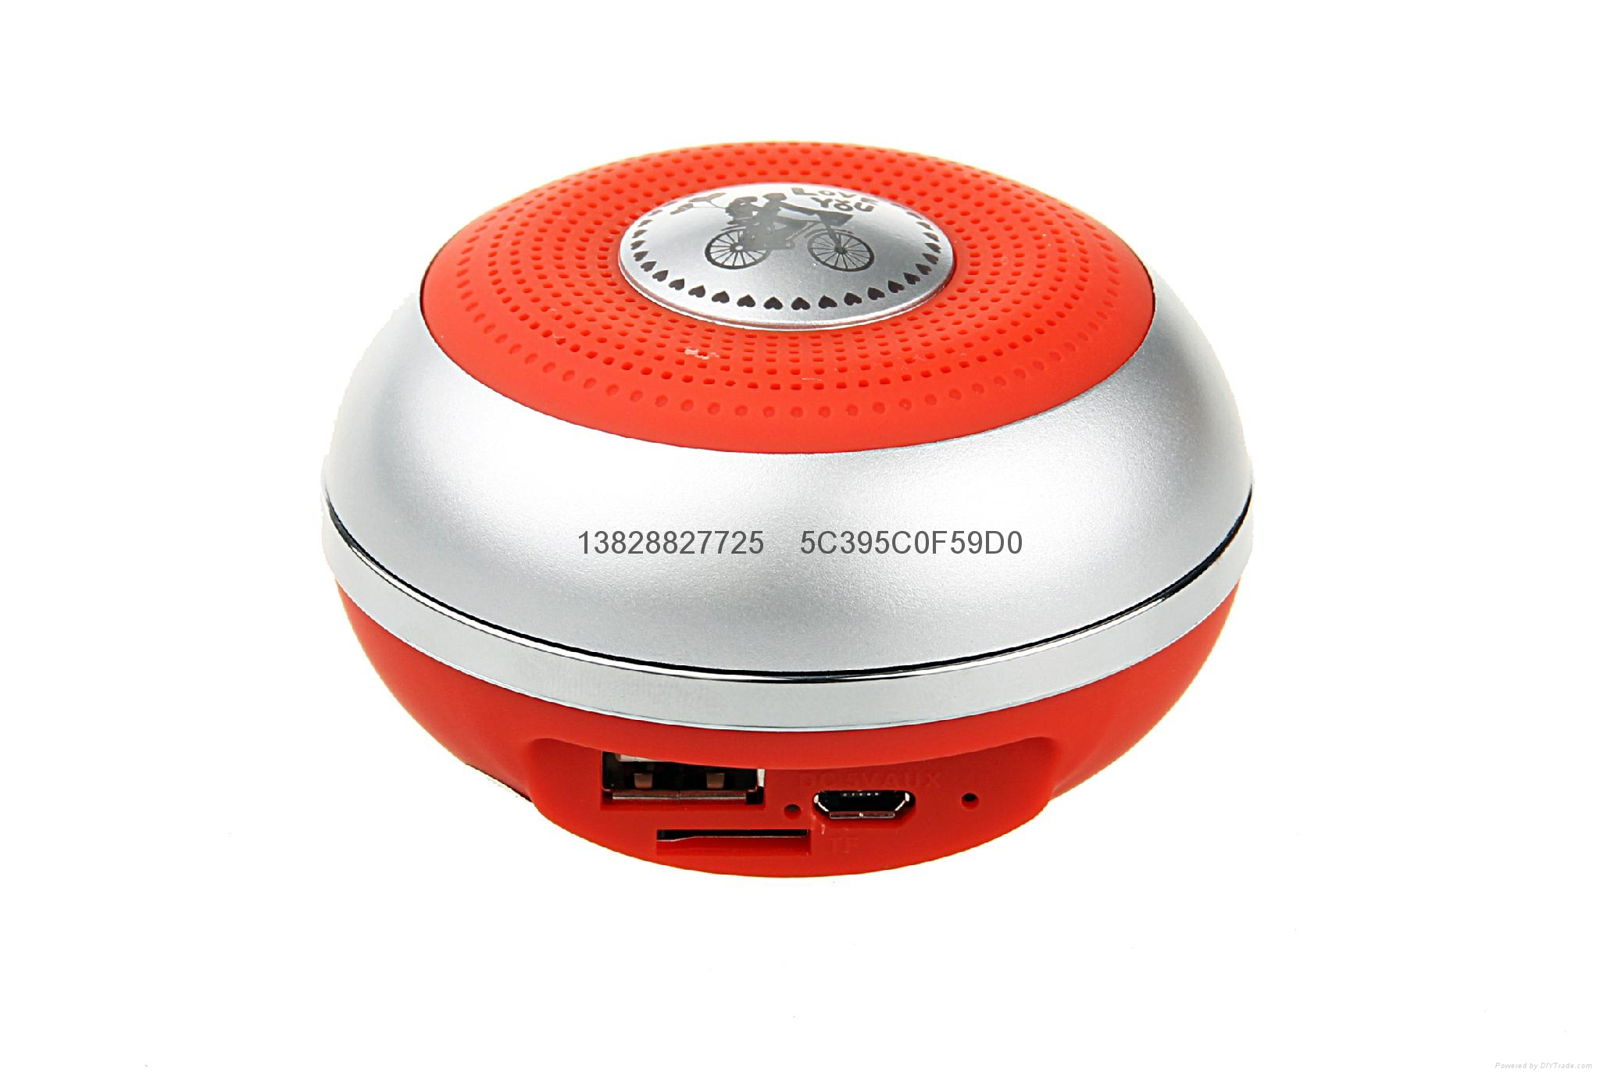 Outdoor CH-221ULED Wireless Portable Bluetooth speaker Mini TF/SD Card With MIC  2